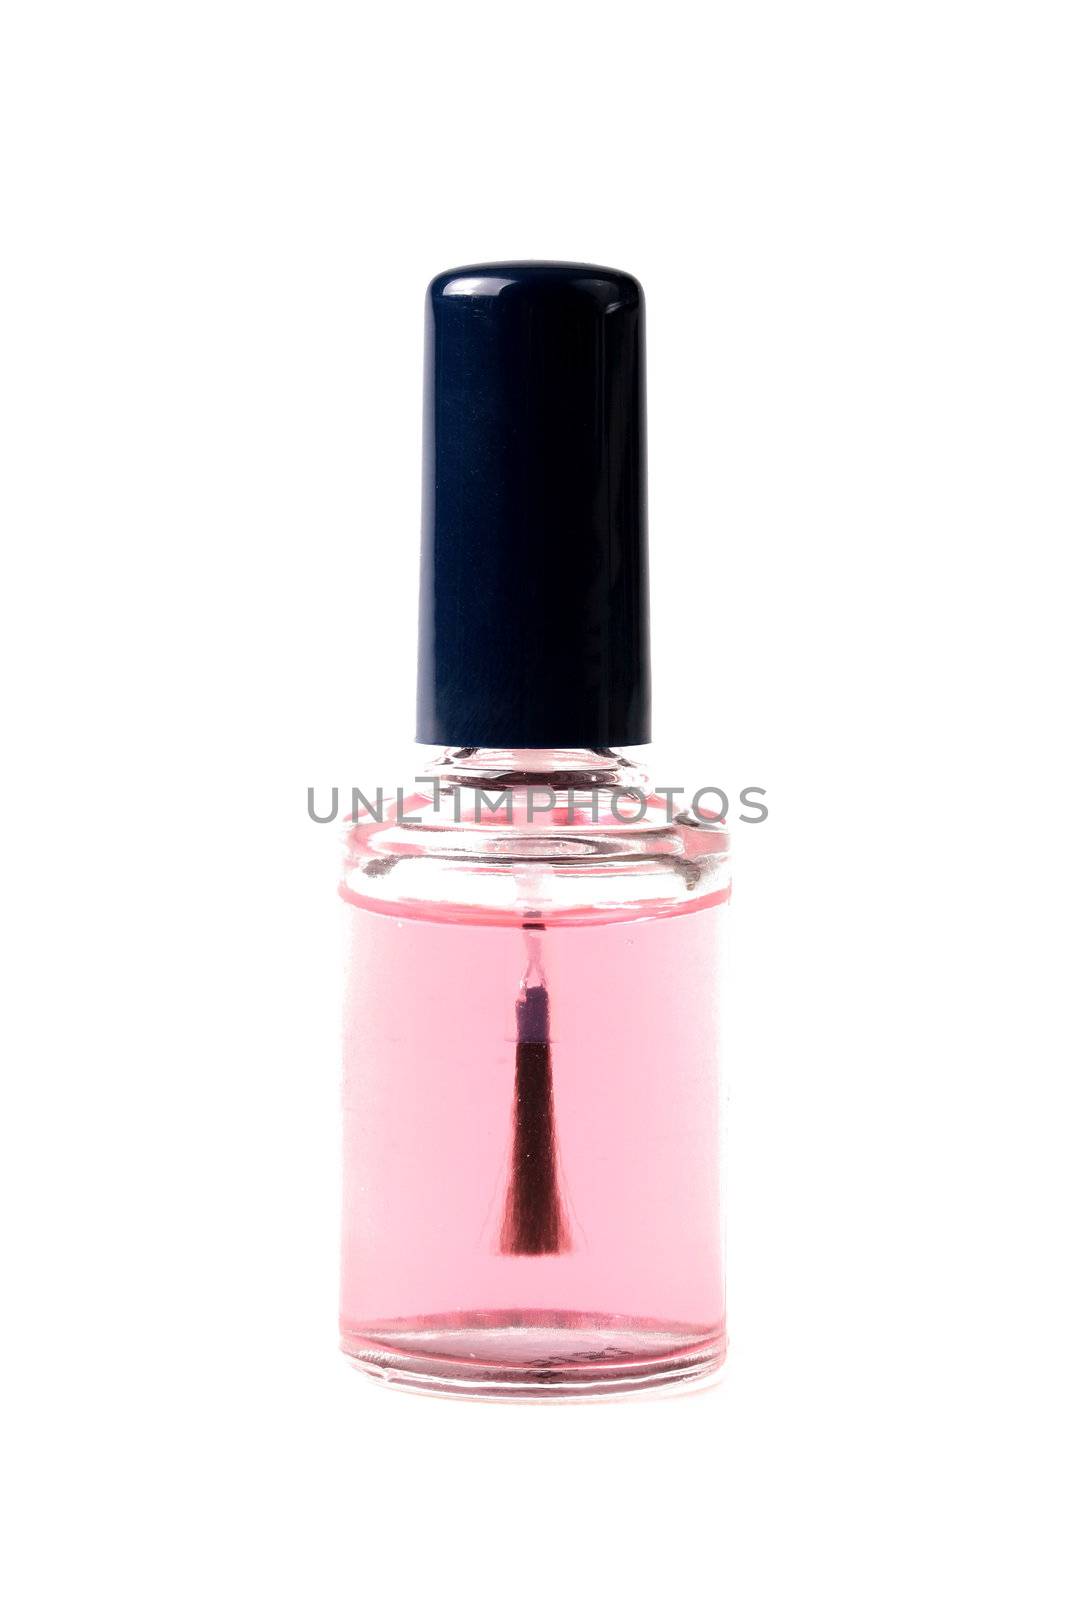 The small bottle with pink transparent nail polish, is used in the course of manicure.